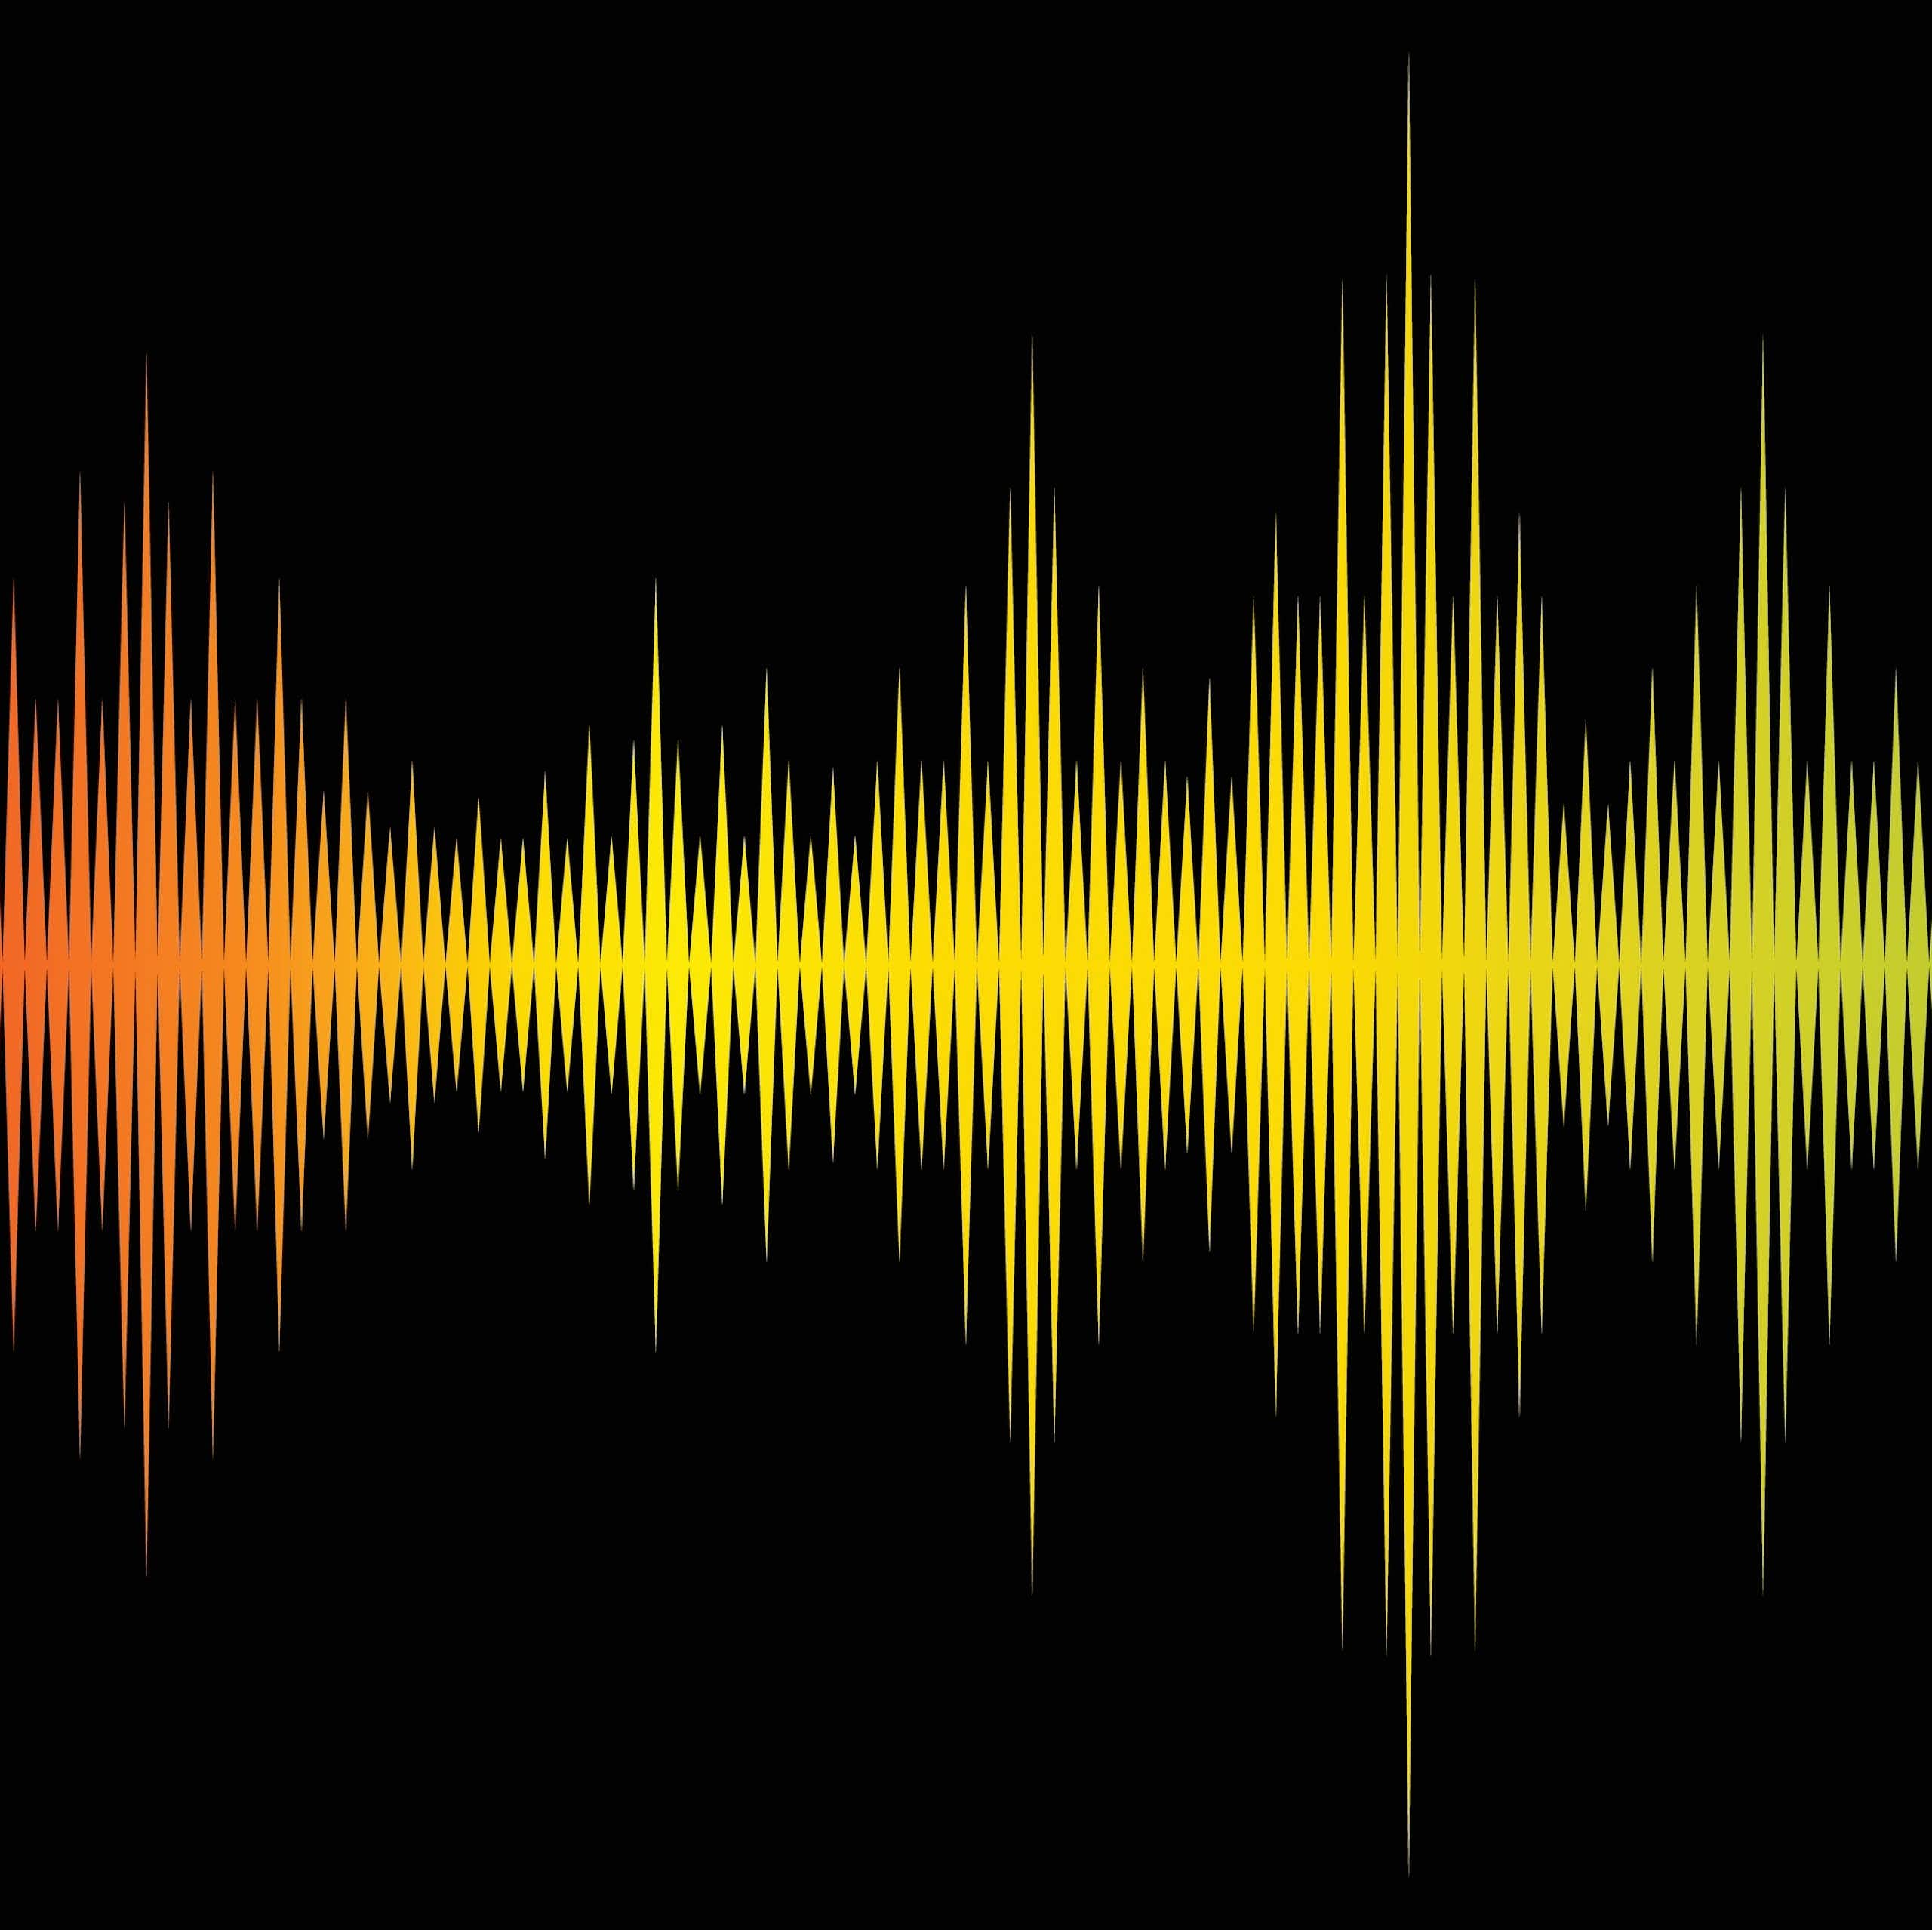 AI can now generate entire songs on demand. What does this mean for music as we know it?